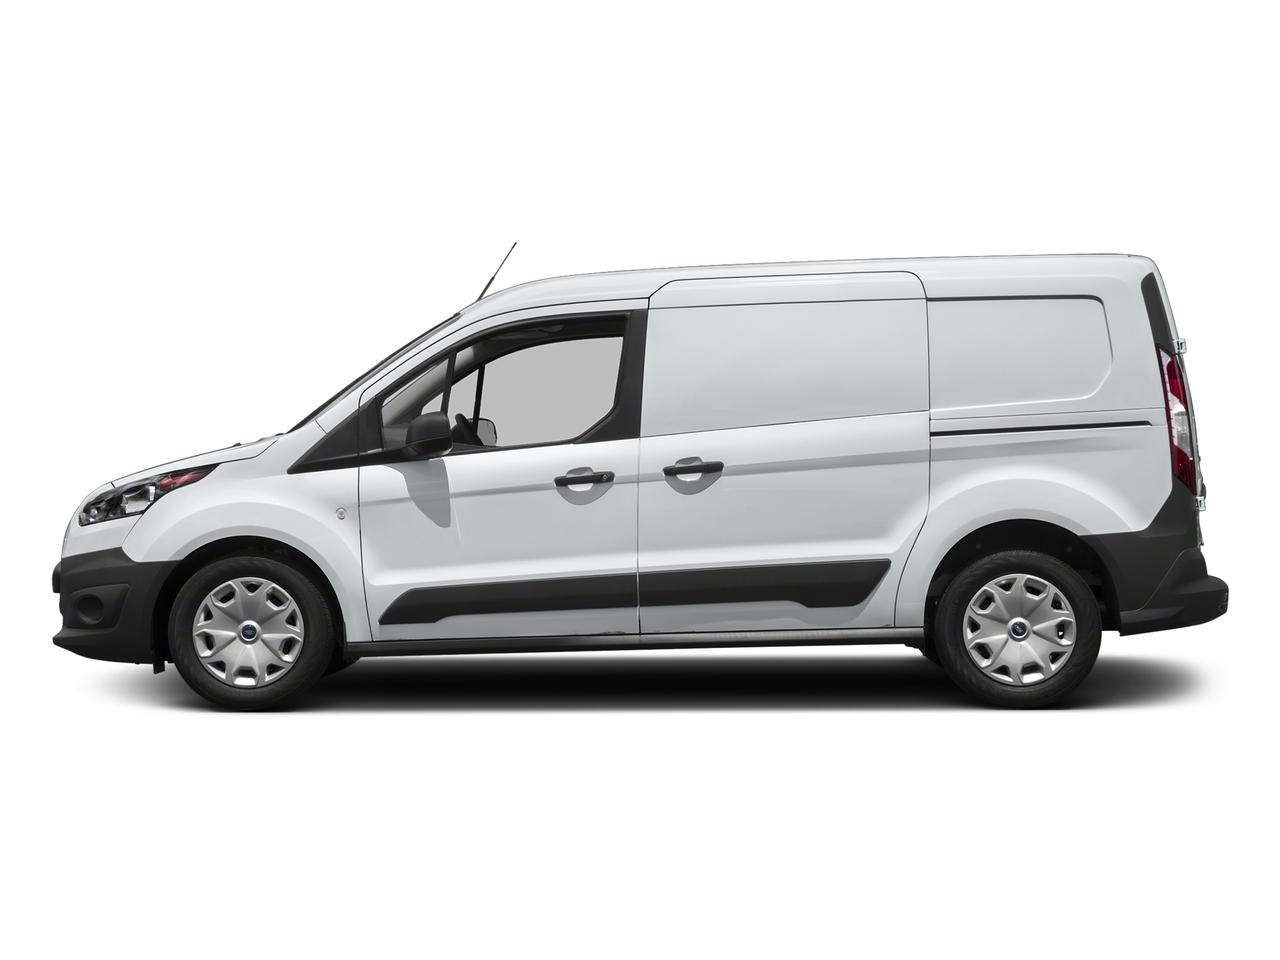 MOORESVILLE White 2017 Ford Transit Connect Van: Used Cargo Van for Sale -  NM0LS7E74H1299324